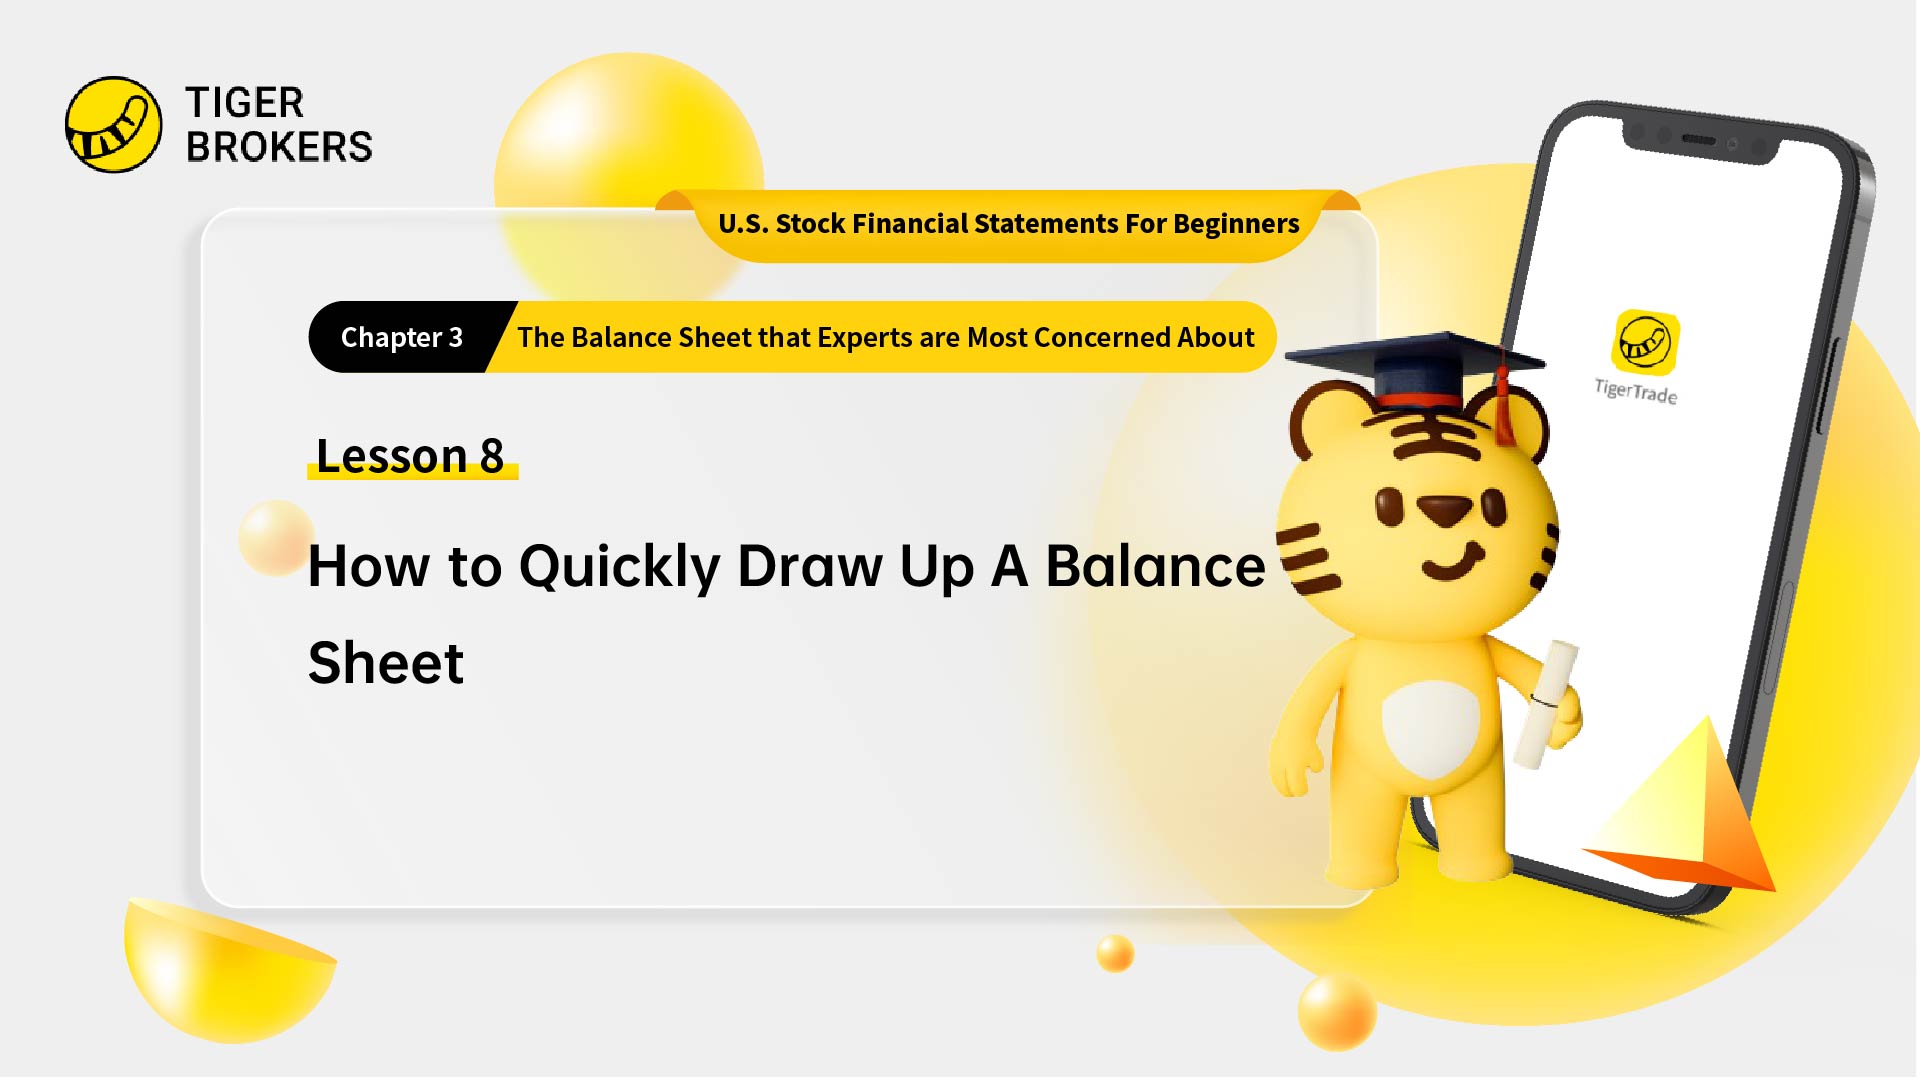 Lesson 8: How to quickly draw up a balance sheet